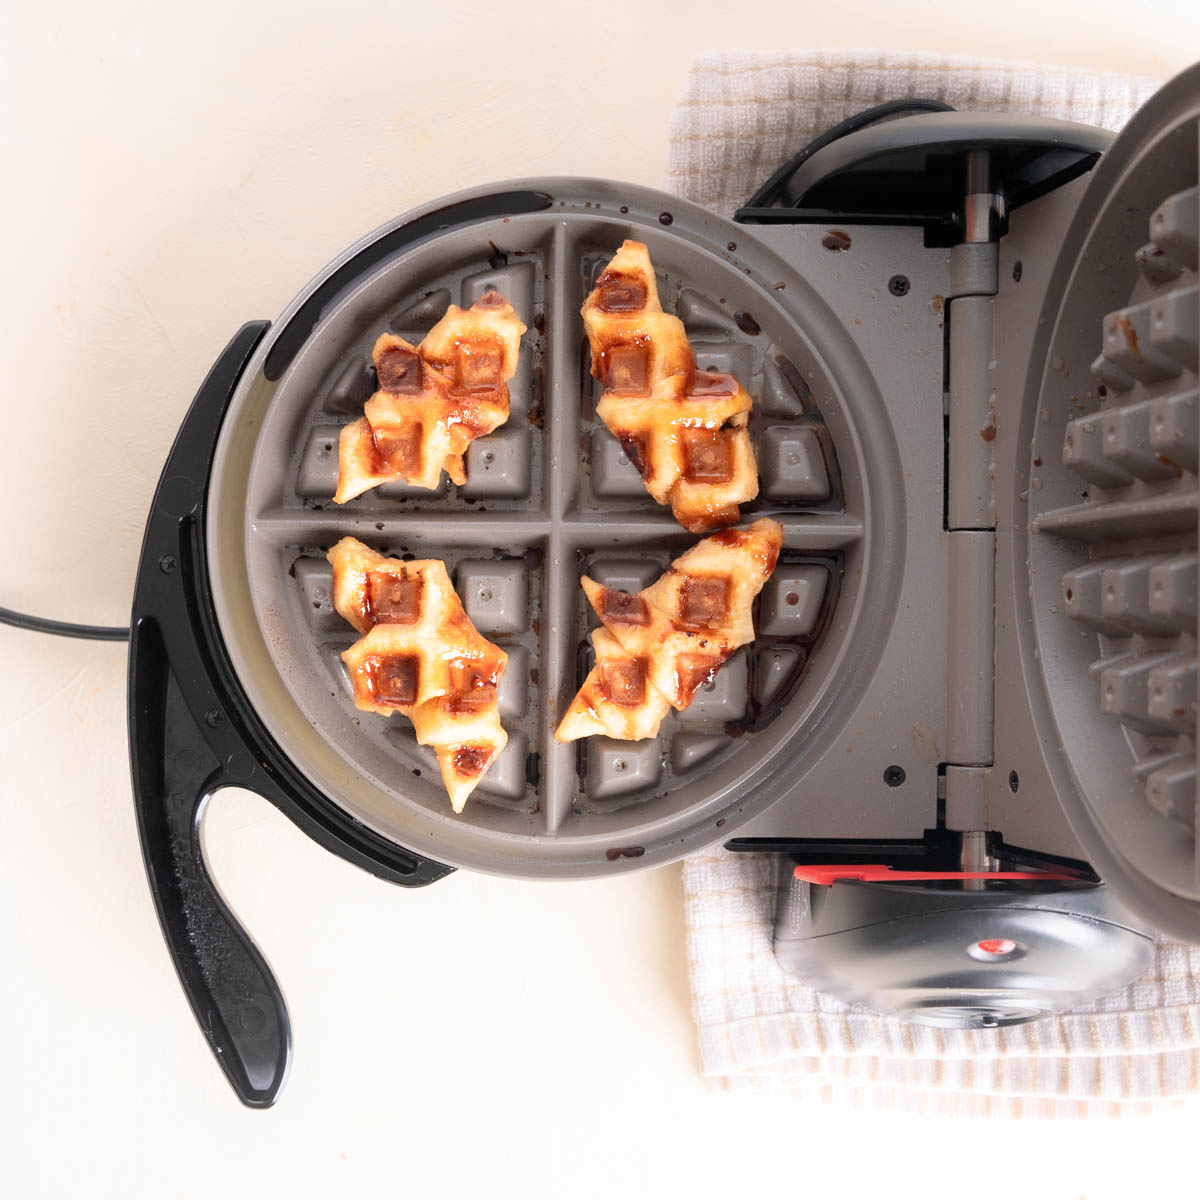 Croffles in a waffle iron.